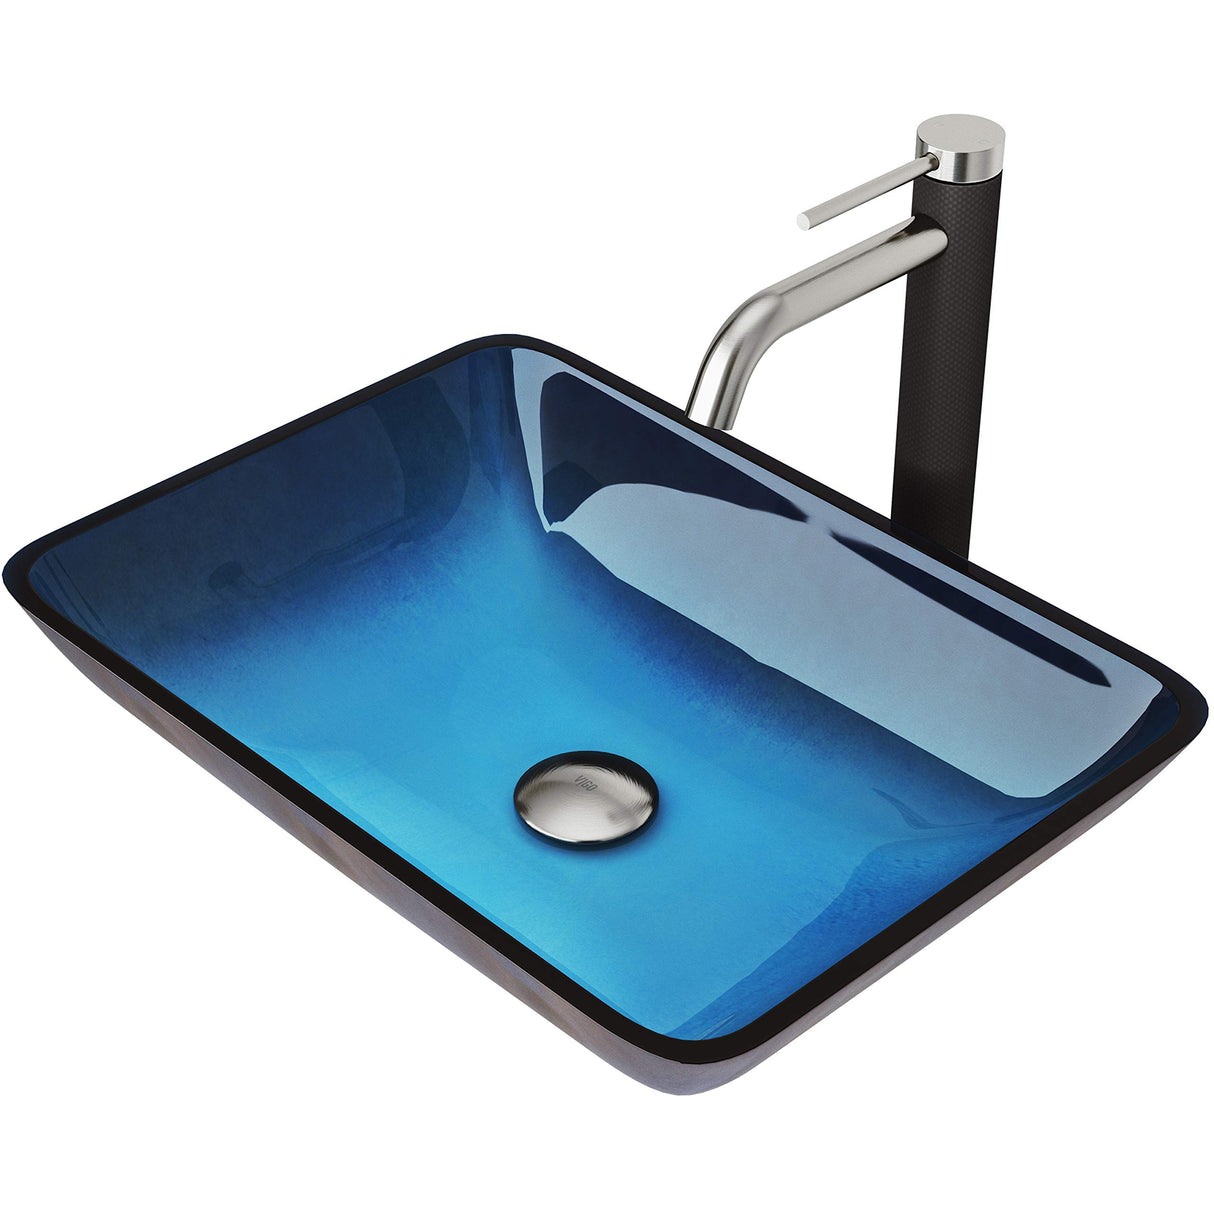 VIGO VGT1440 18.125" L -13.0" W -10.25" H Handmade Countertop Glass Rectangular Vessel Bathroom Sink Set in Turquoise Finish with cFiber Brushed Nickel Single-Handle Faucet and Pop Up Drain